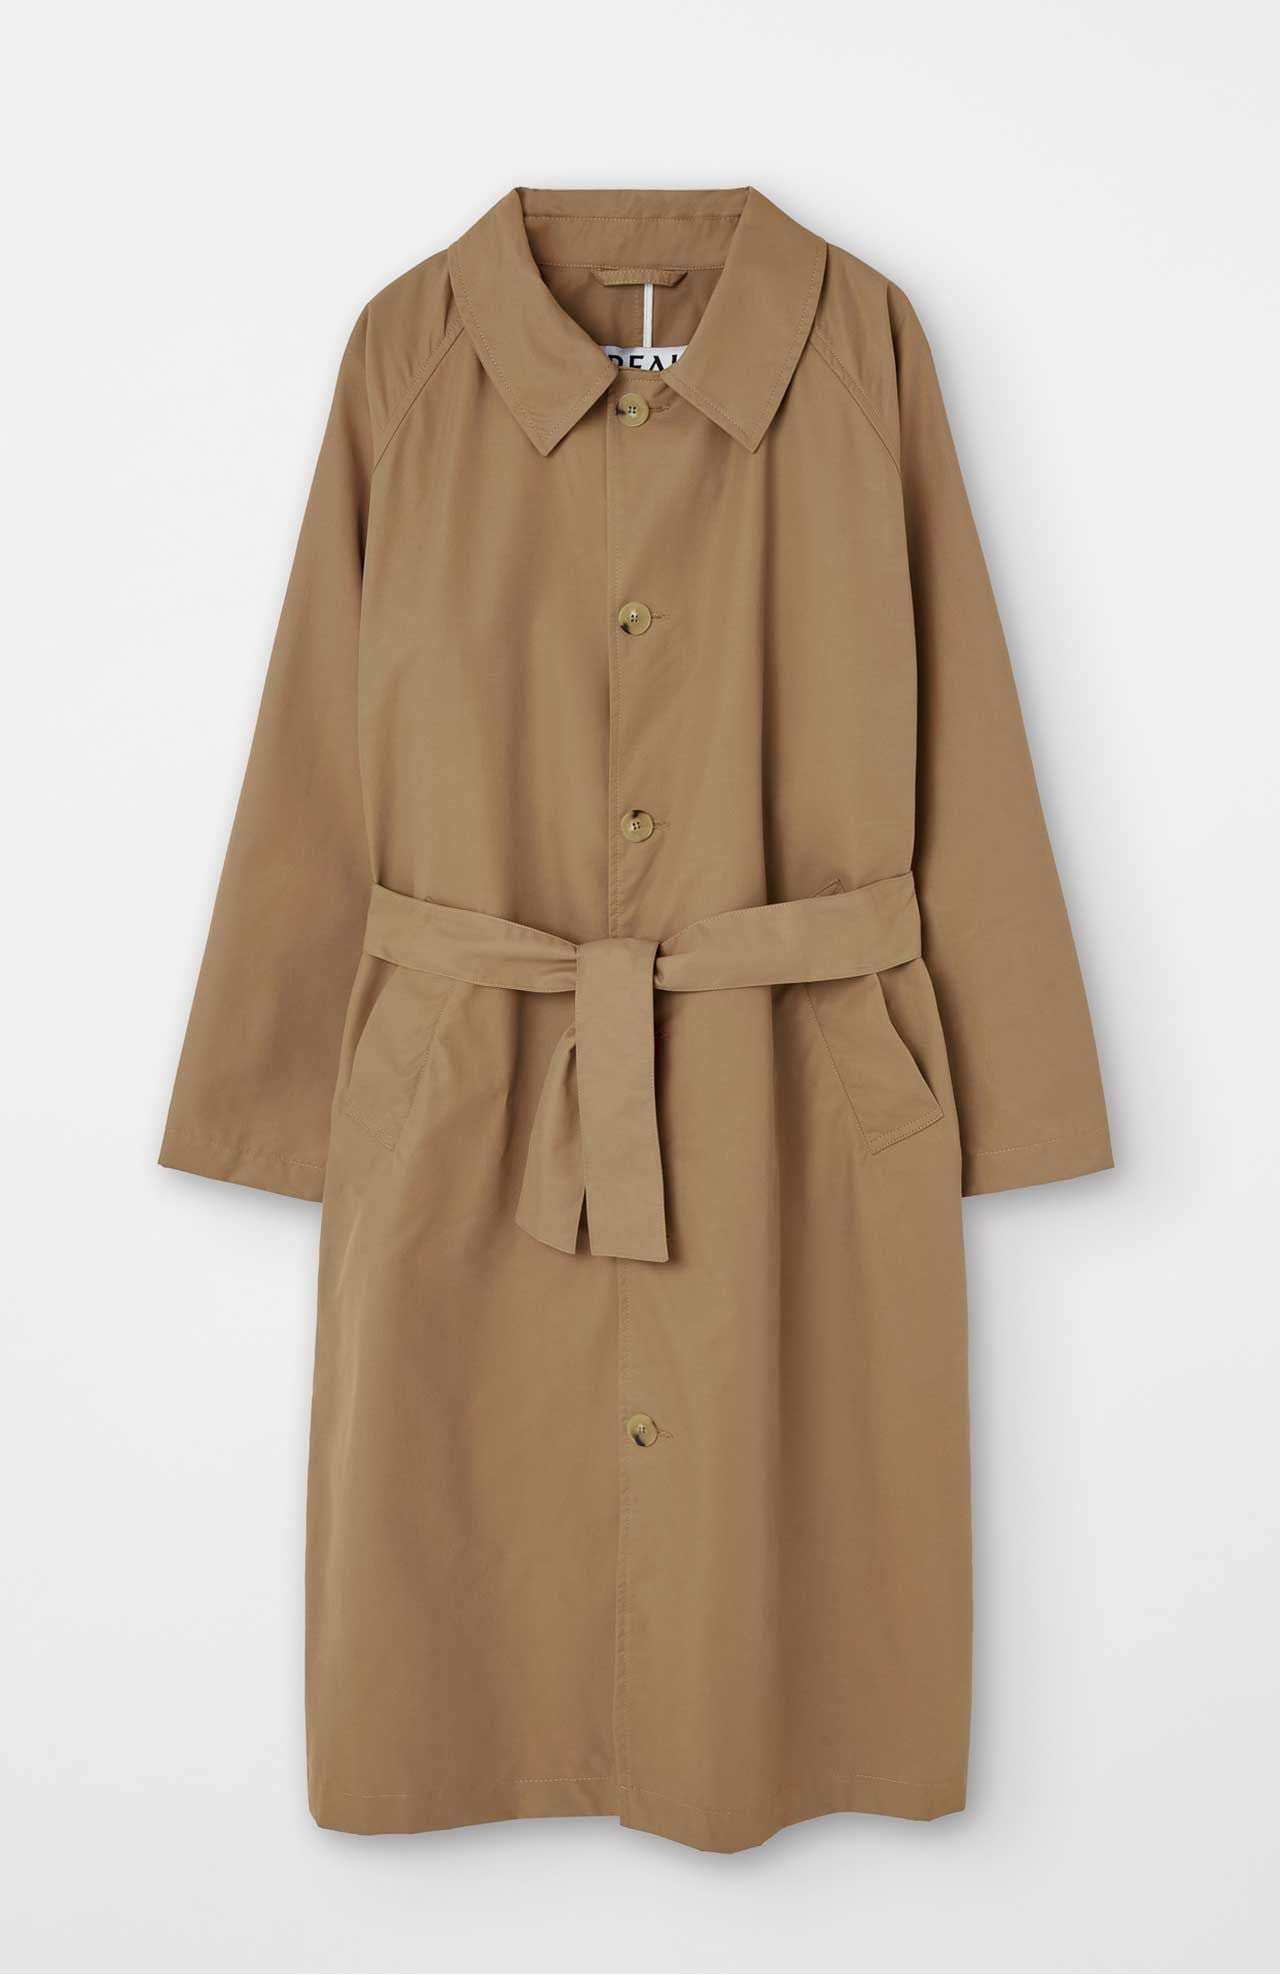 Trench style coat in dark camel colour